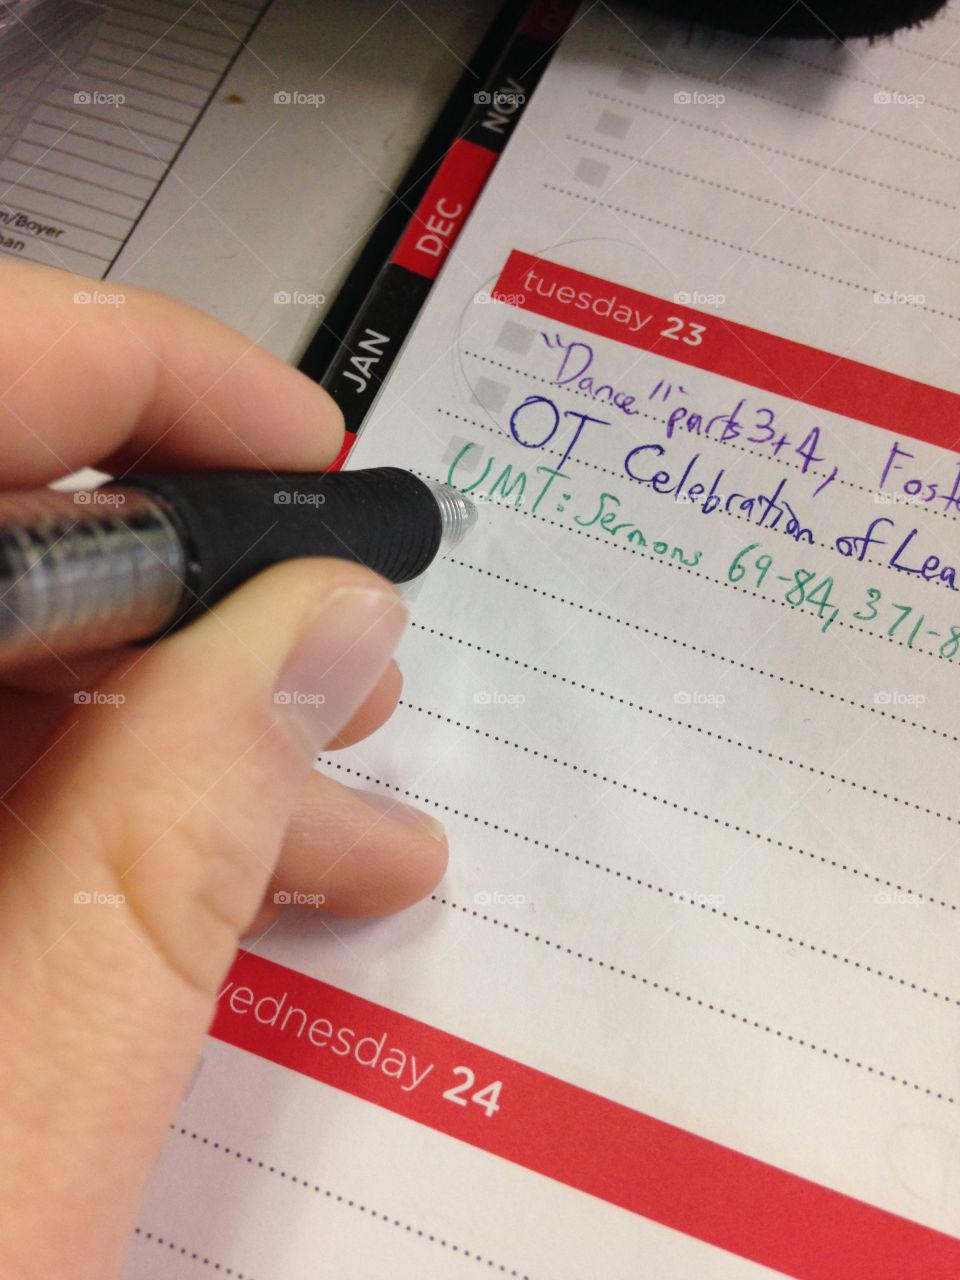 Planner note taking (Left-handed) happens to be on the date February 23 2016